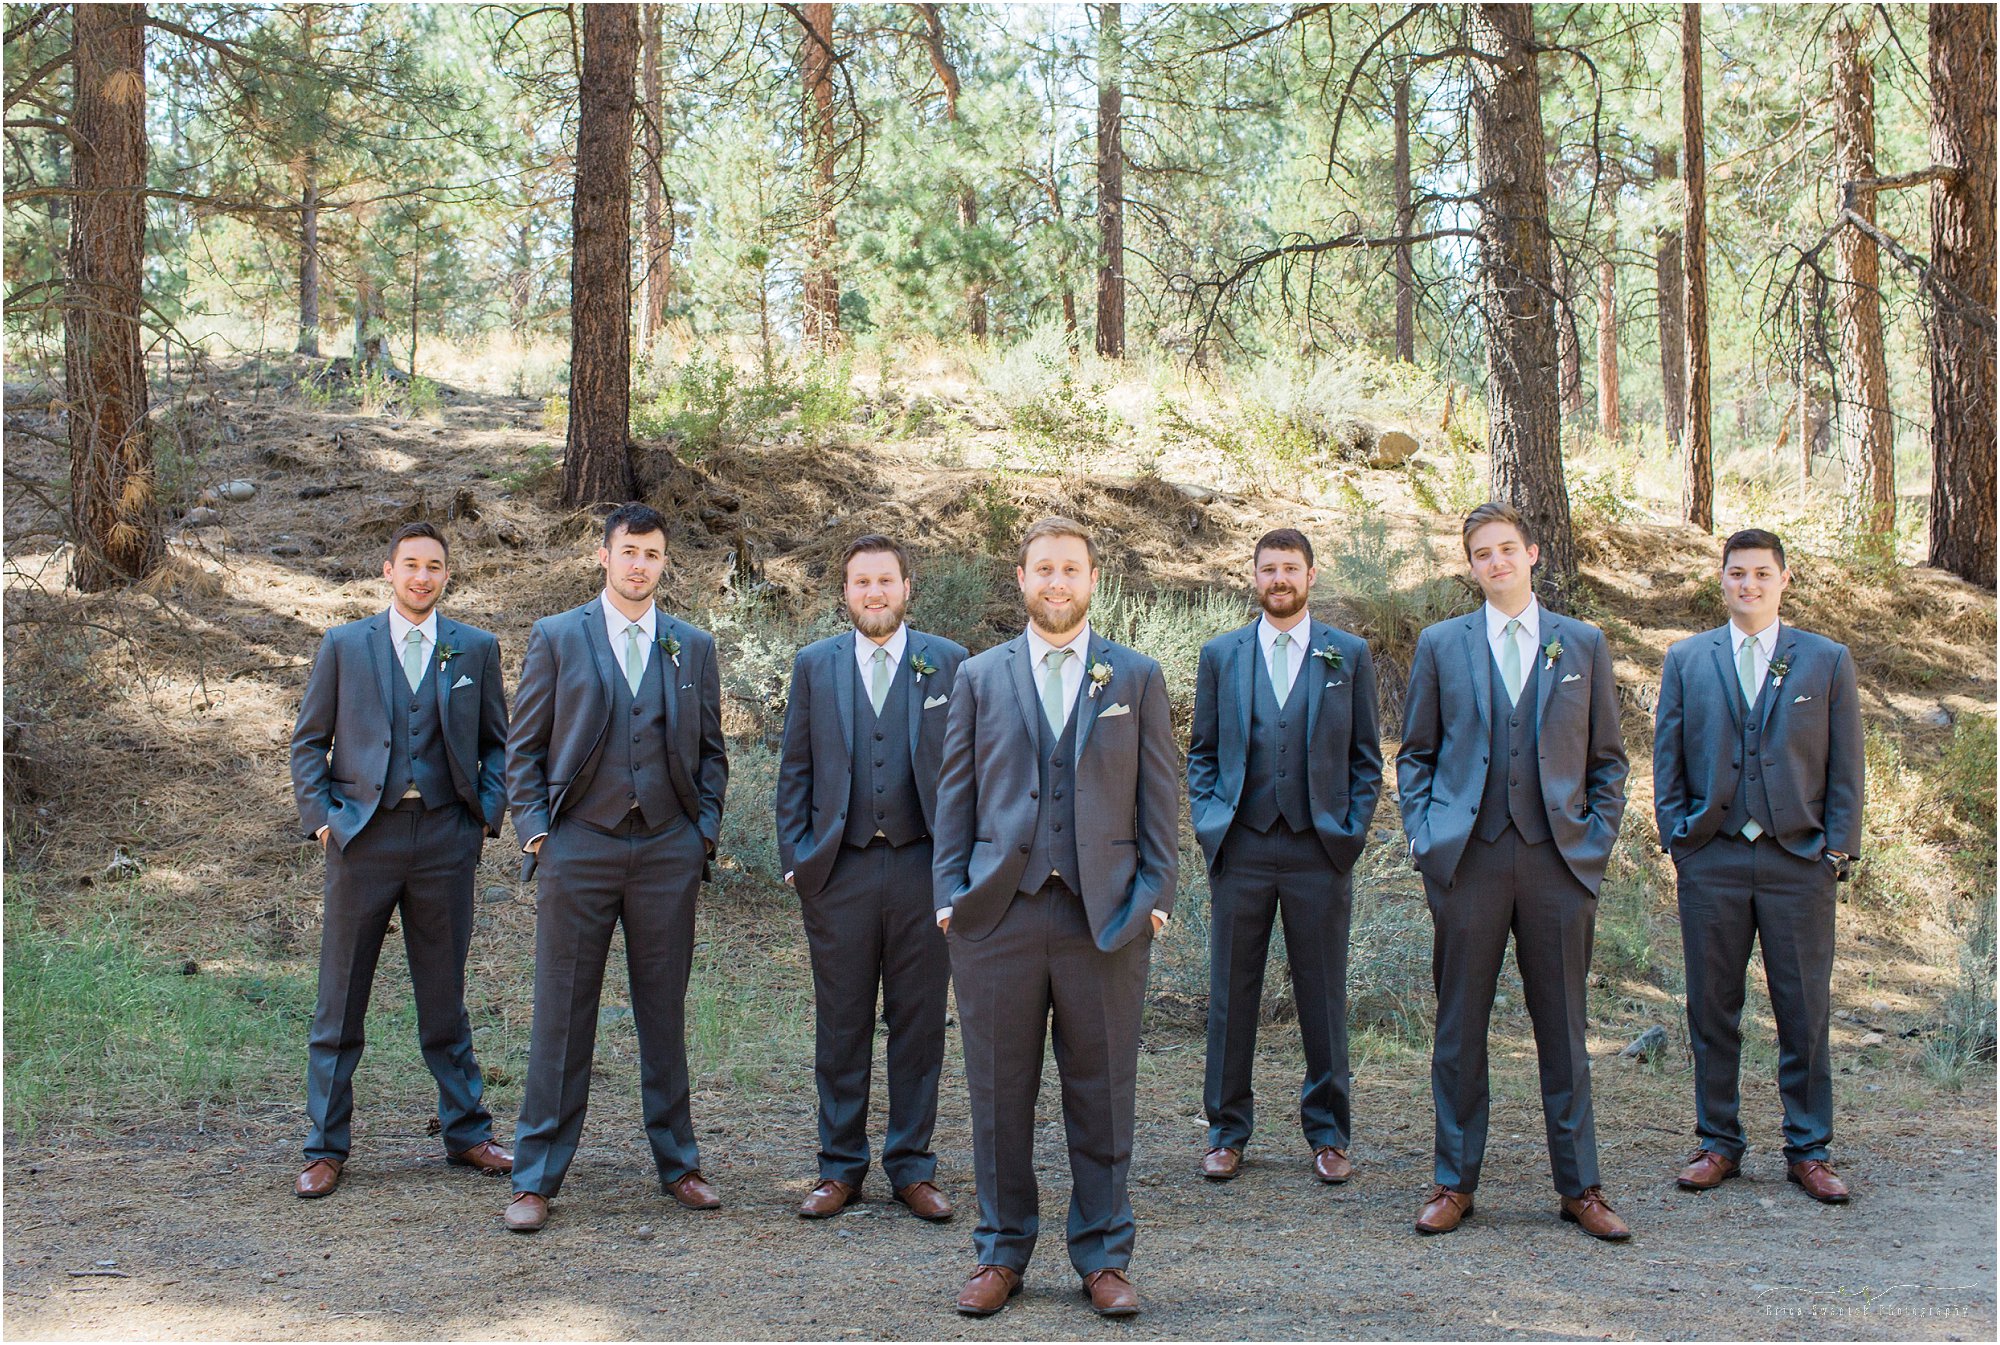 A dapper groom and his groomsmen pose for formals at this vintage rustic chic Bend wedding at Aspen Hall. | Erica Swantek Photography